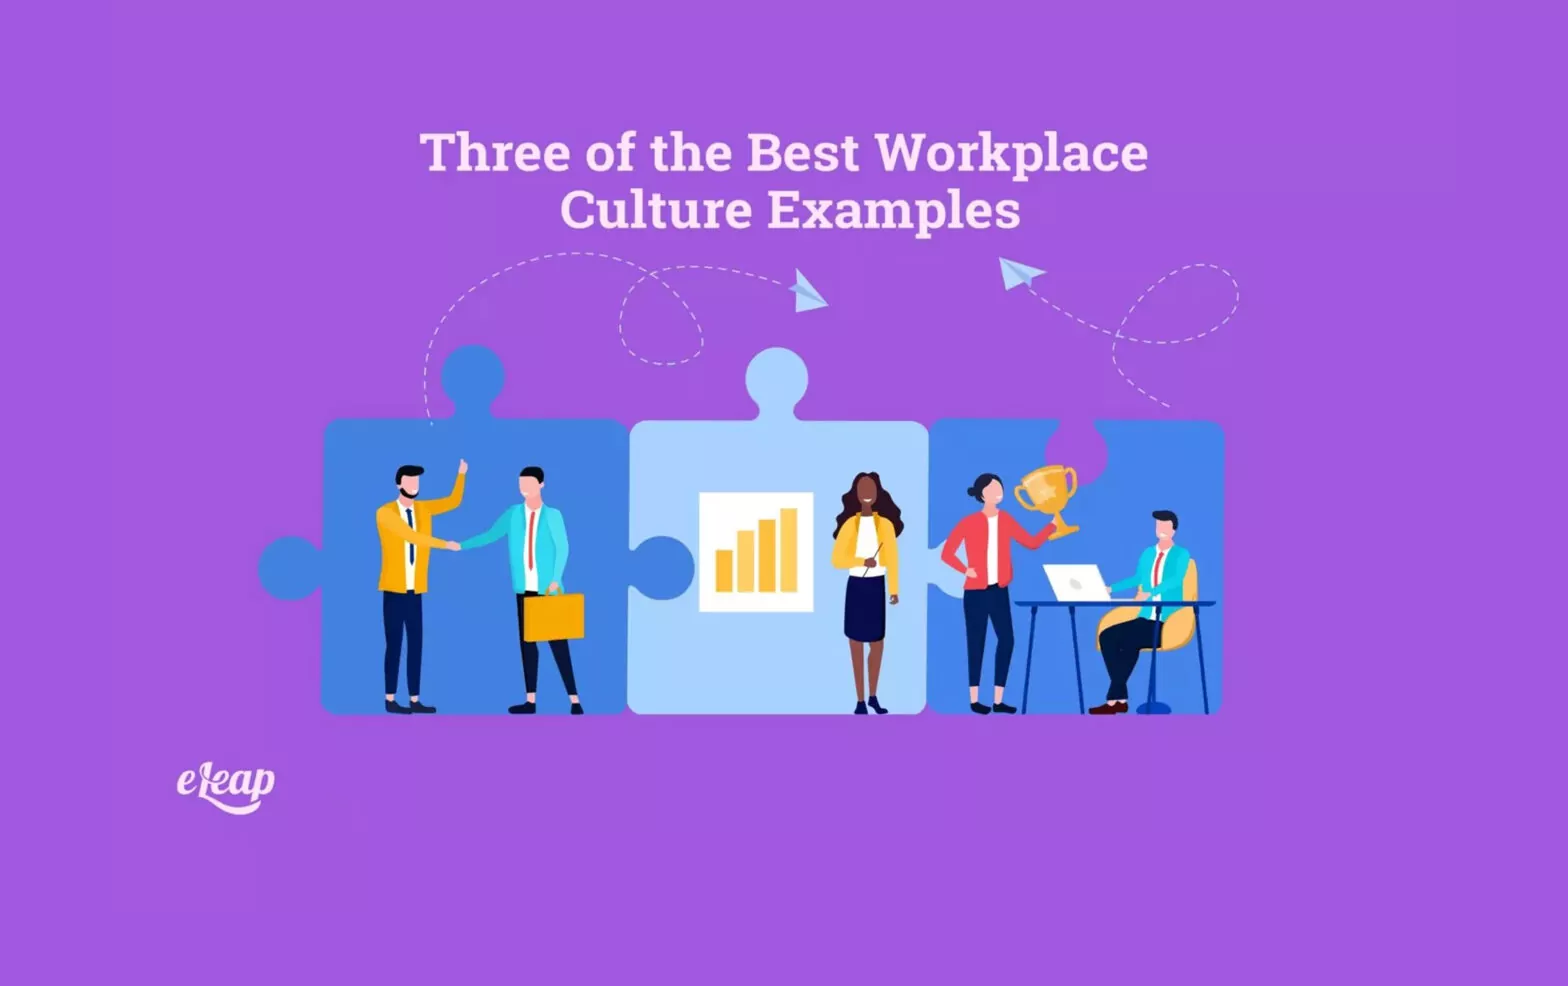 Three of the Best Workplace Culture Examples